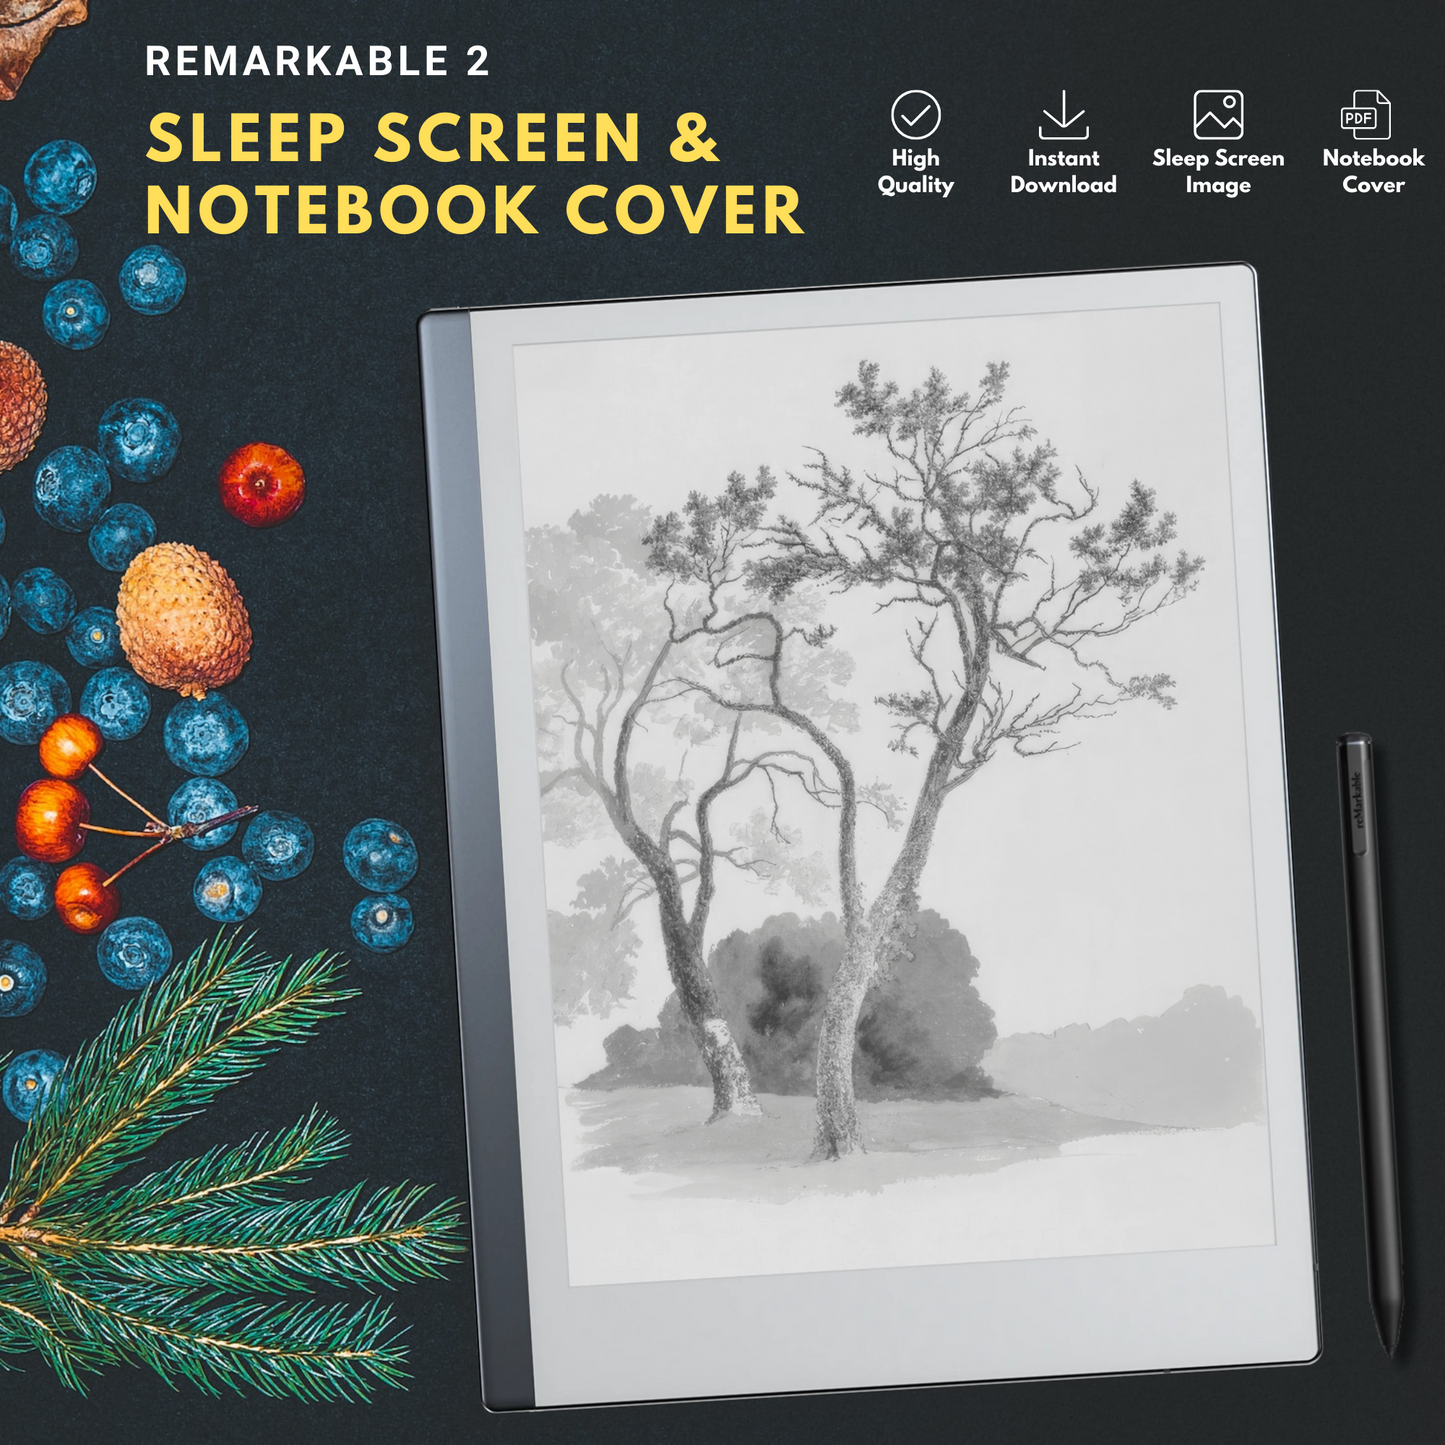 Remarkable 2 Sleep Screen & Notebook Cover Artwork - Orchard Trees